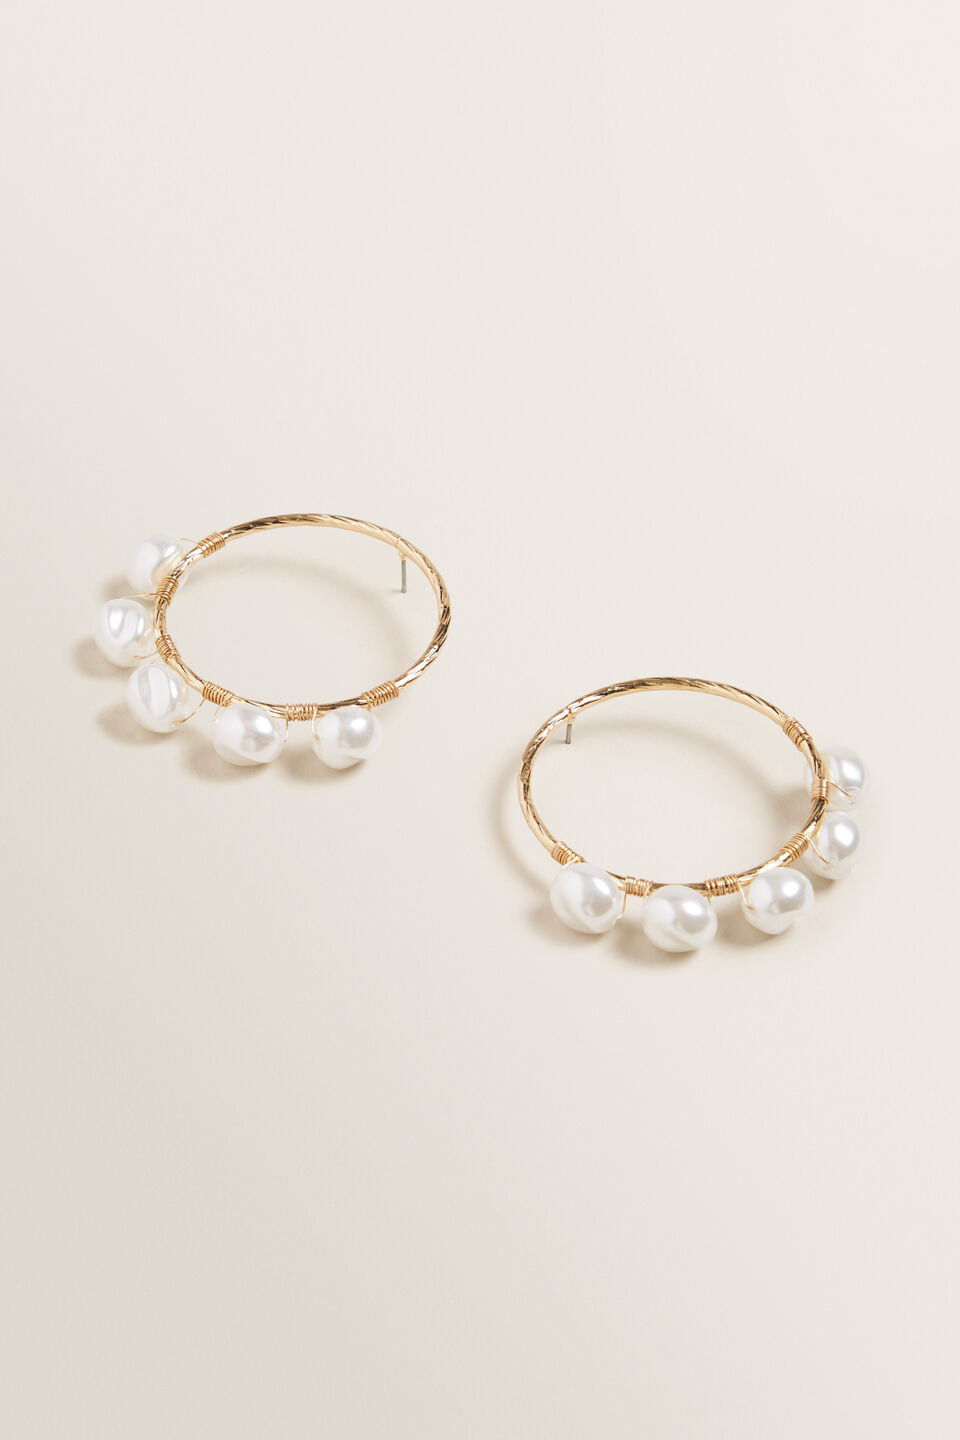 Front Facing Pearl Earrings  Gold